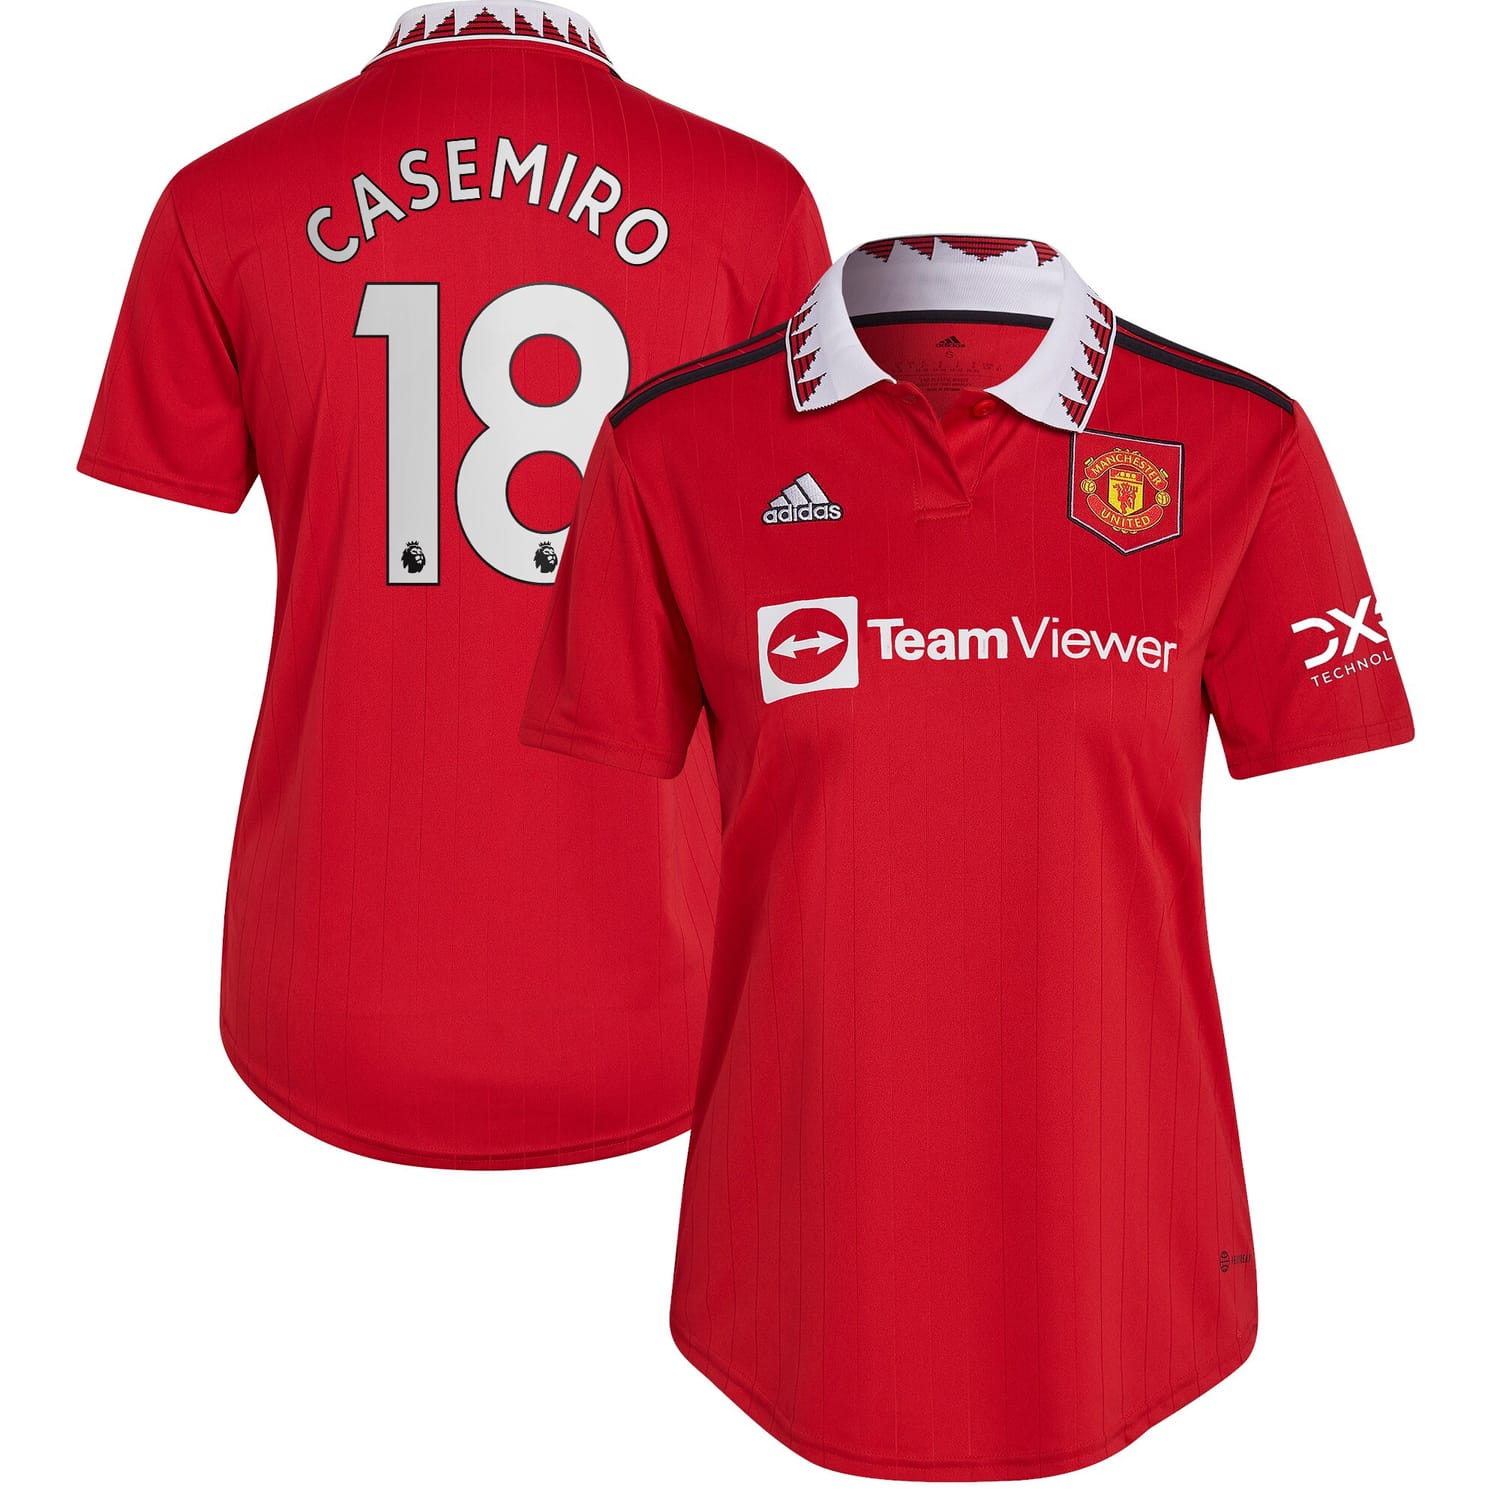 Premier League Manchester United Home Jersey Shirt 2022-23 player Casemiro 18 printing for Women